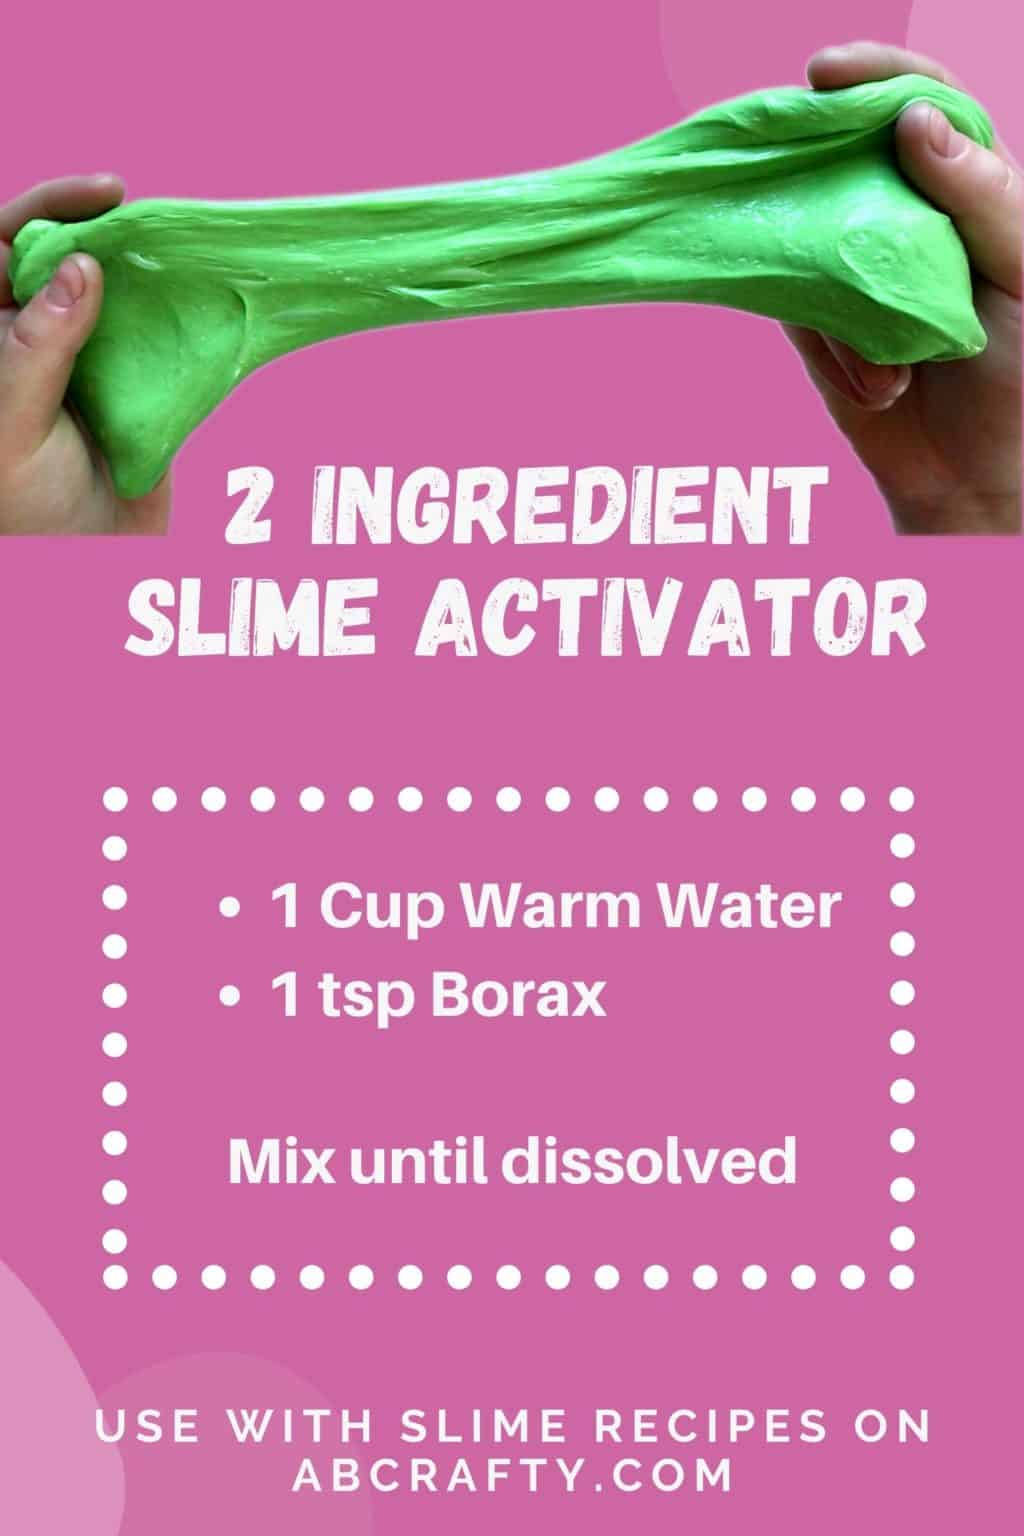 recipe card for slime activator showing two hands stretching some green slime with the title "2 ingredient slime activator"